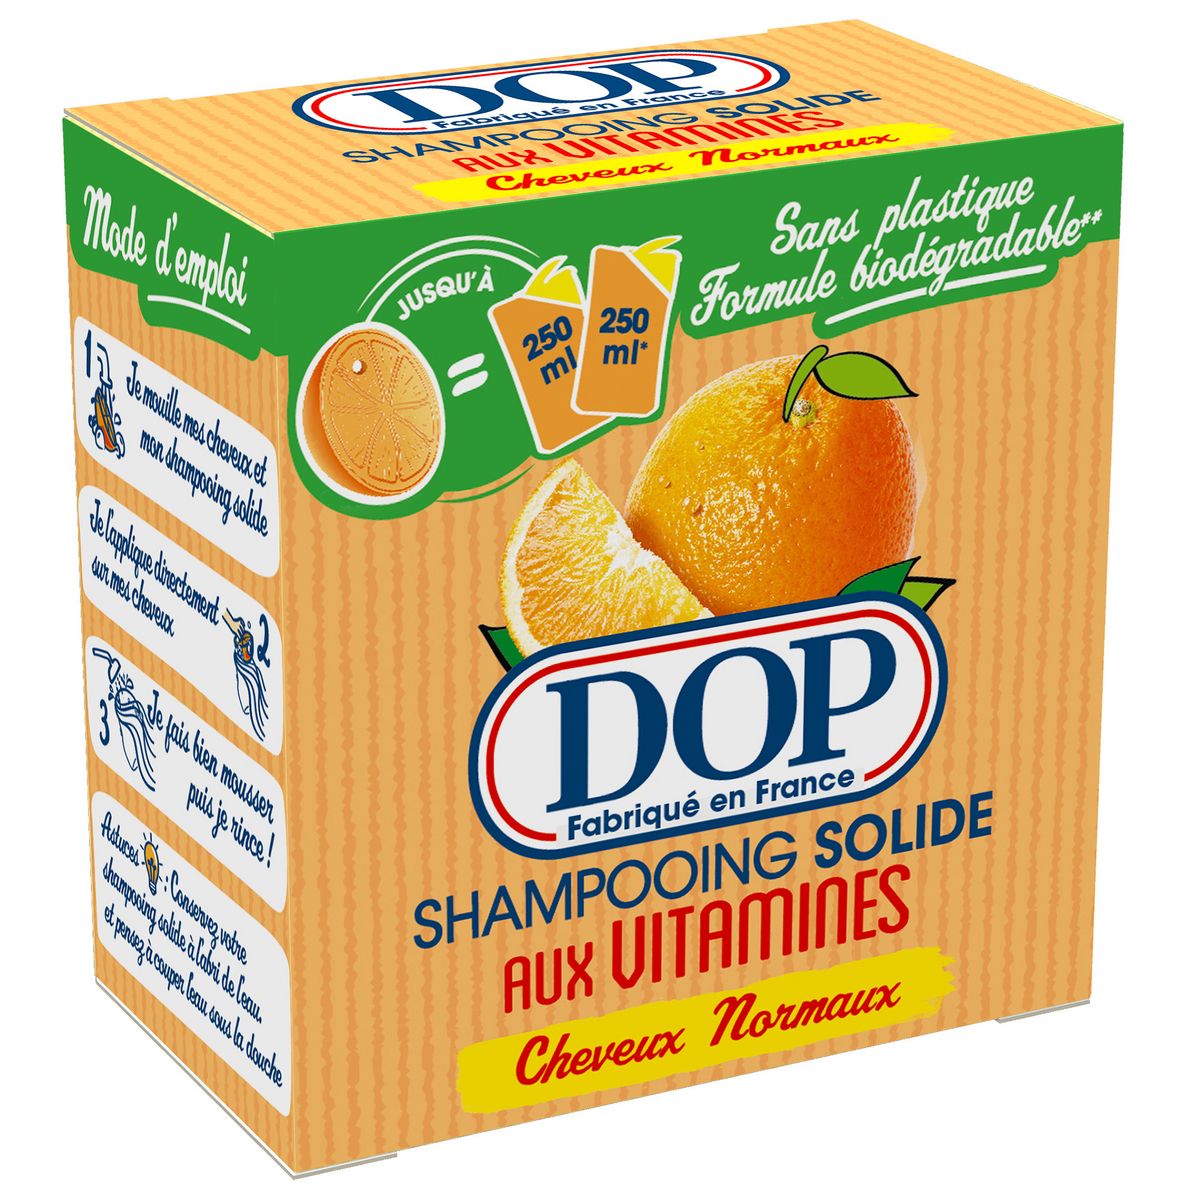 DOP Shampooing solide aux vitamines cheveux normaux 76g